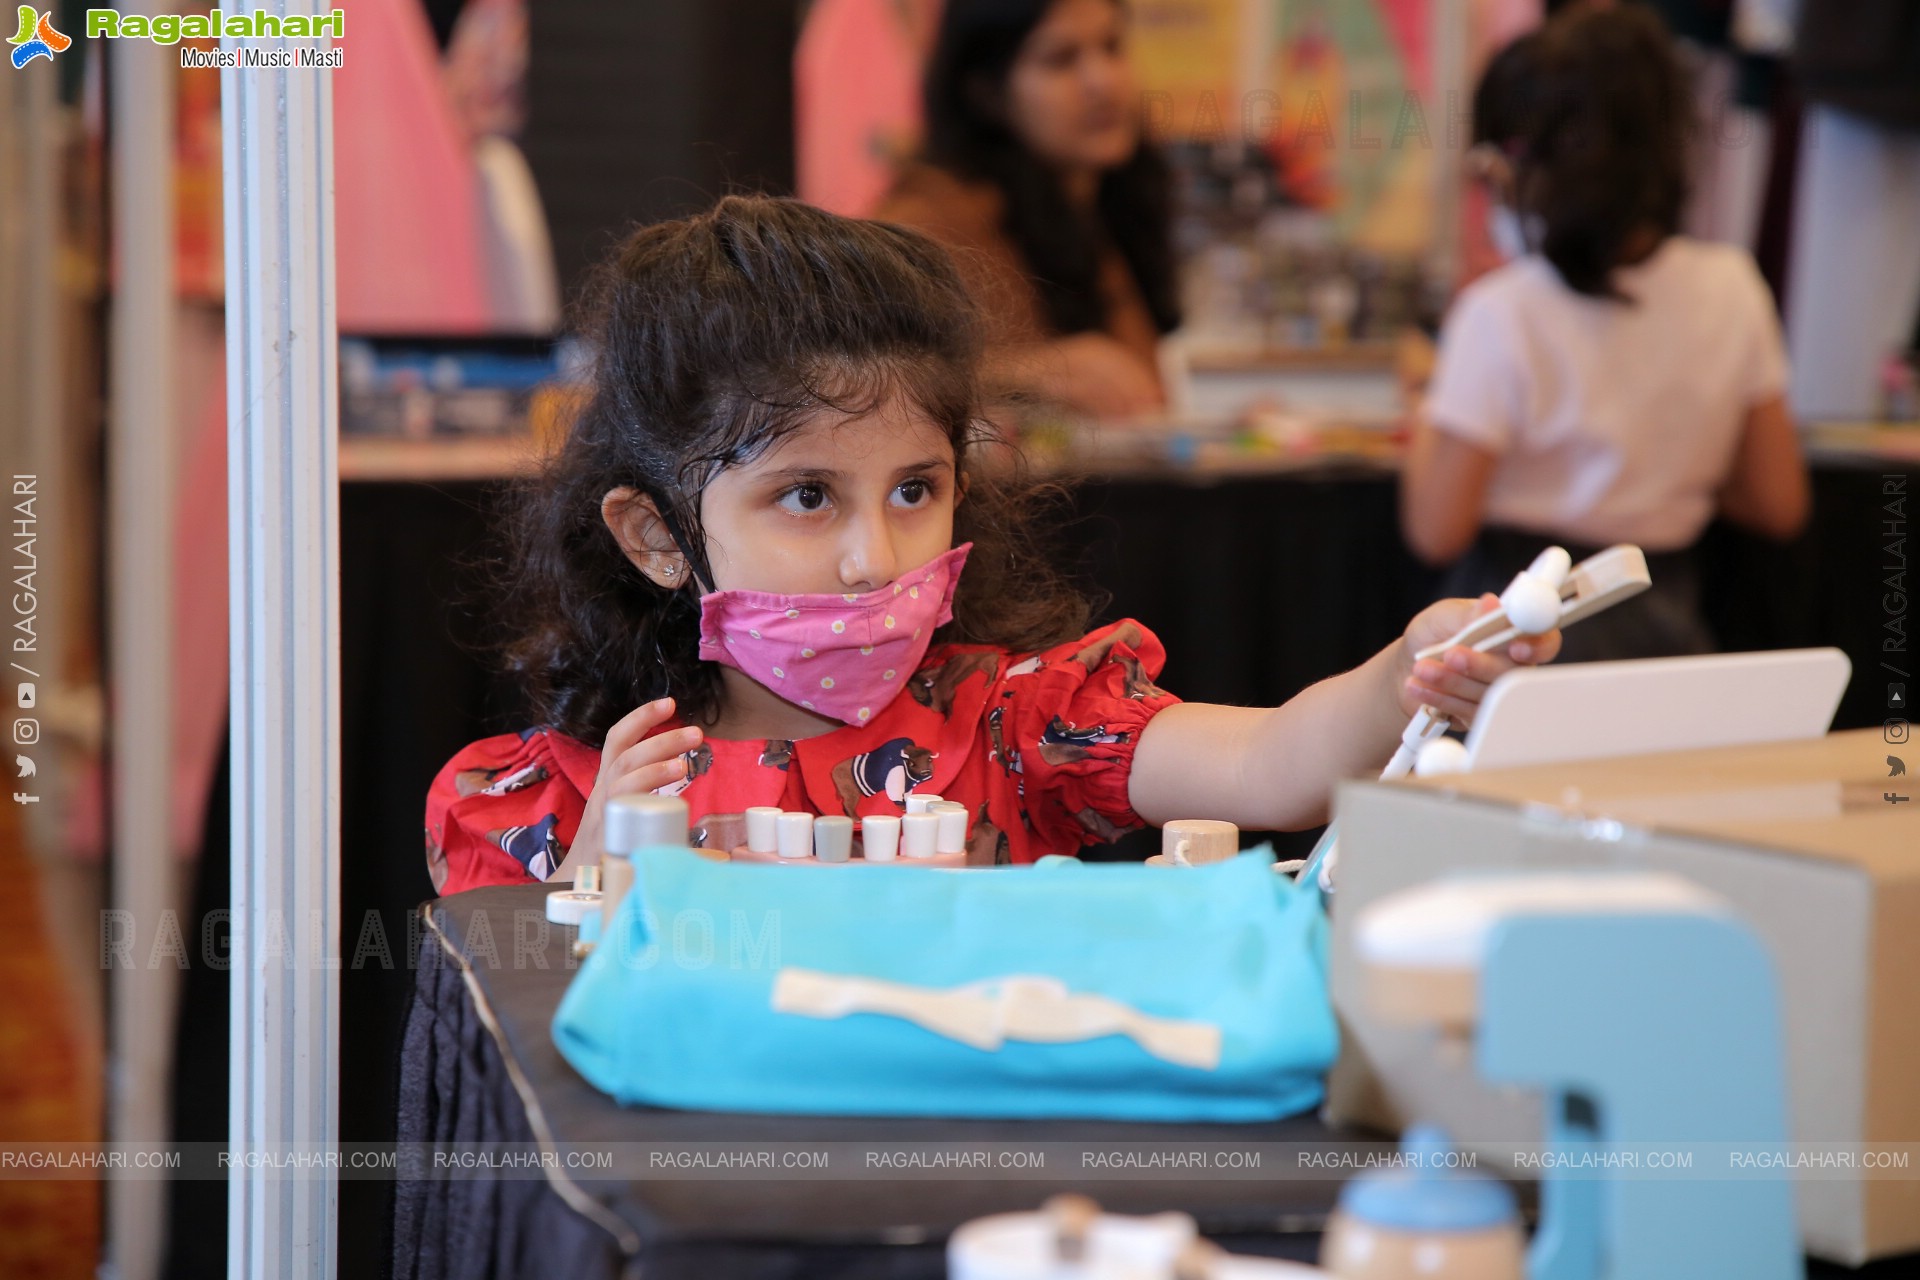 The Carousel & Co - An Elite Pop Up For Mom & Kids at Taj Deccan